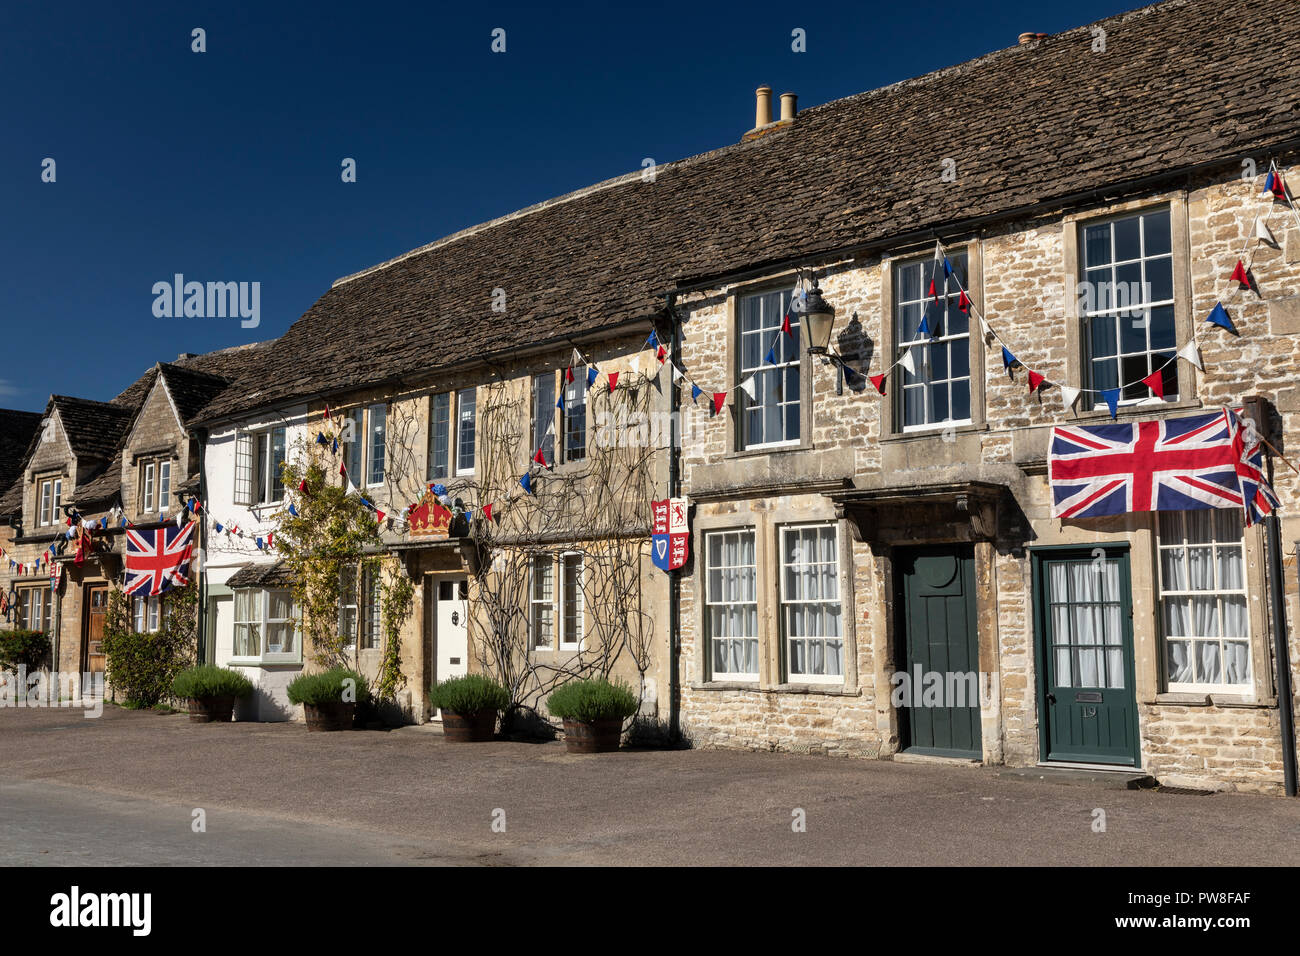 Lacock village High Street transformed back to the 1920s for the filming of Downton Abbey, Wiltshire, England, UK Stock Photo